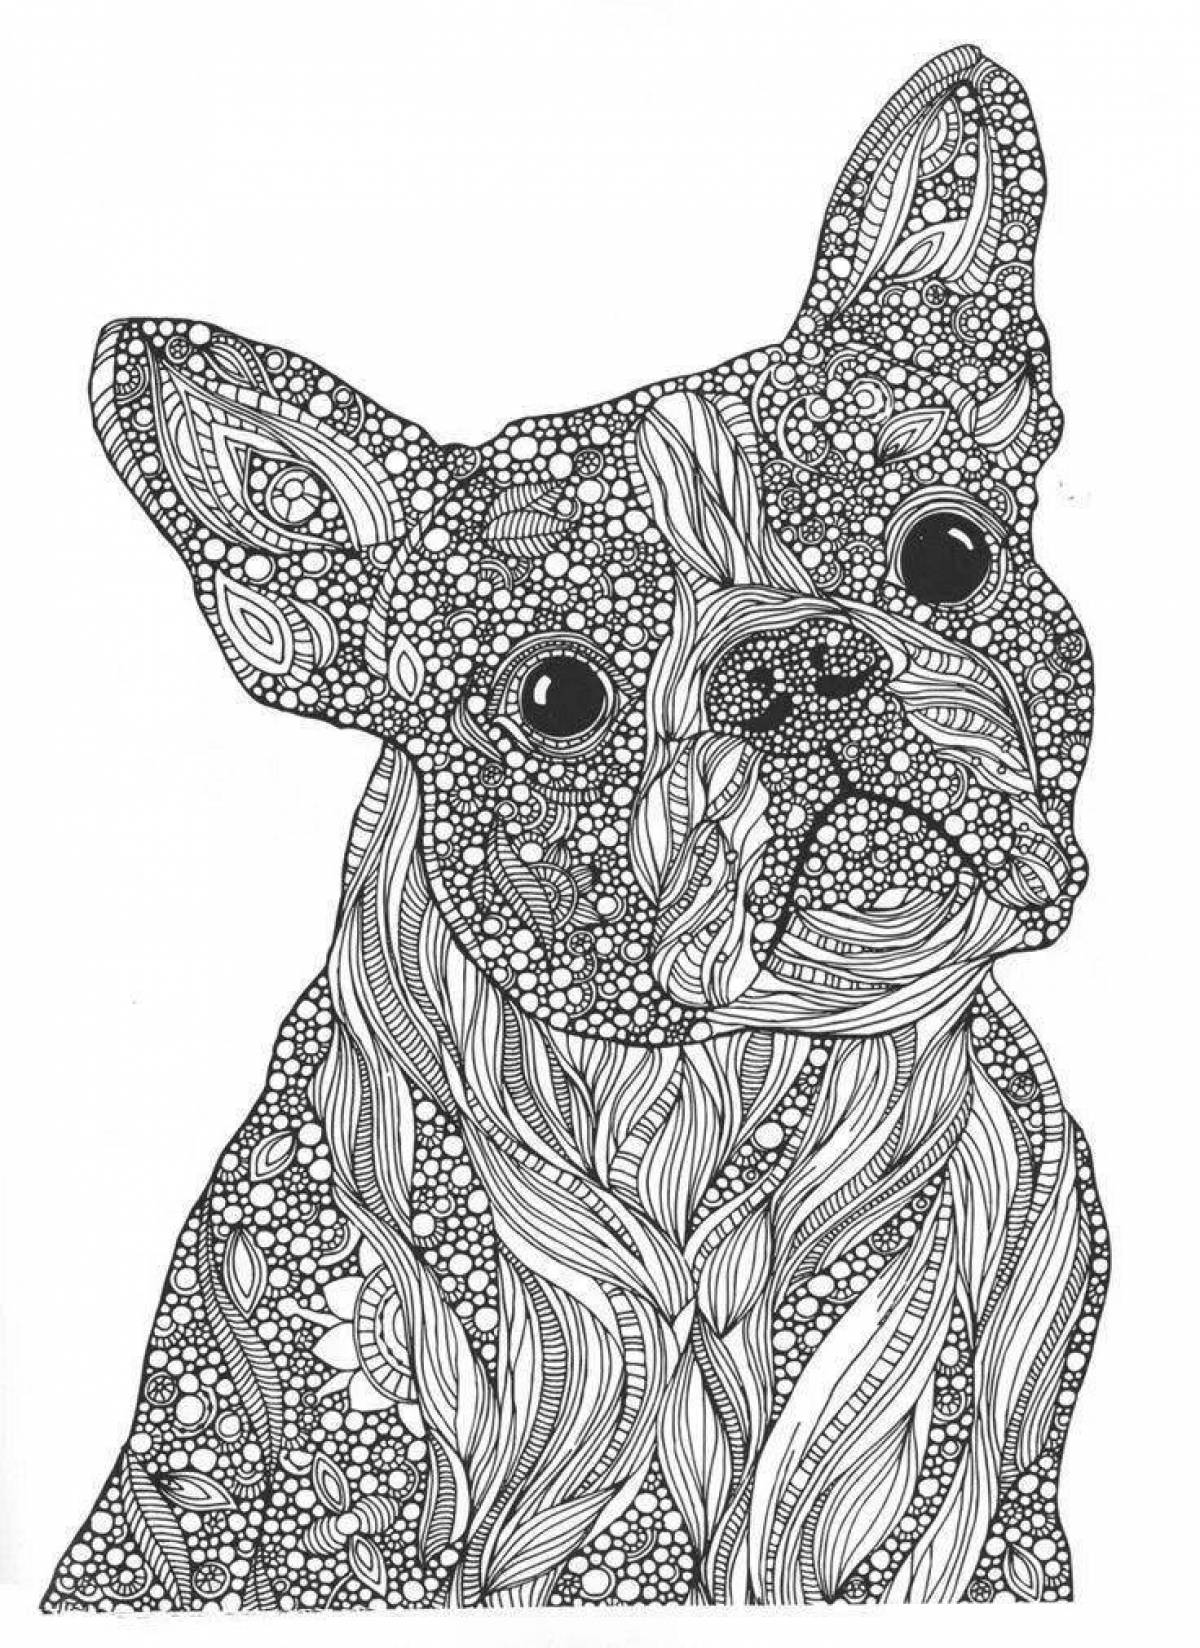 Radiant dog antistress coloring page